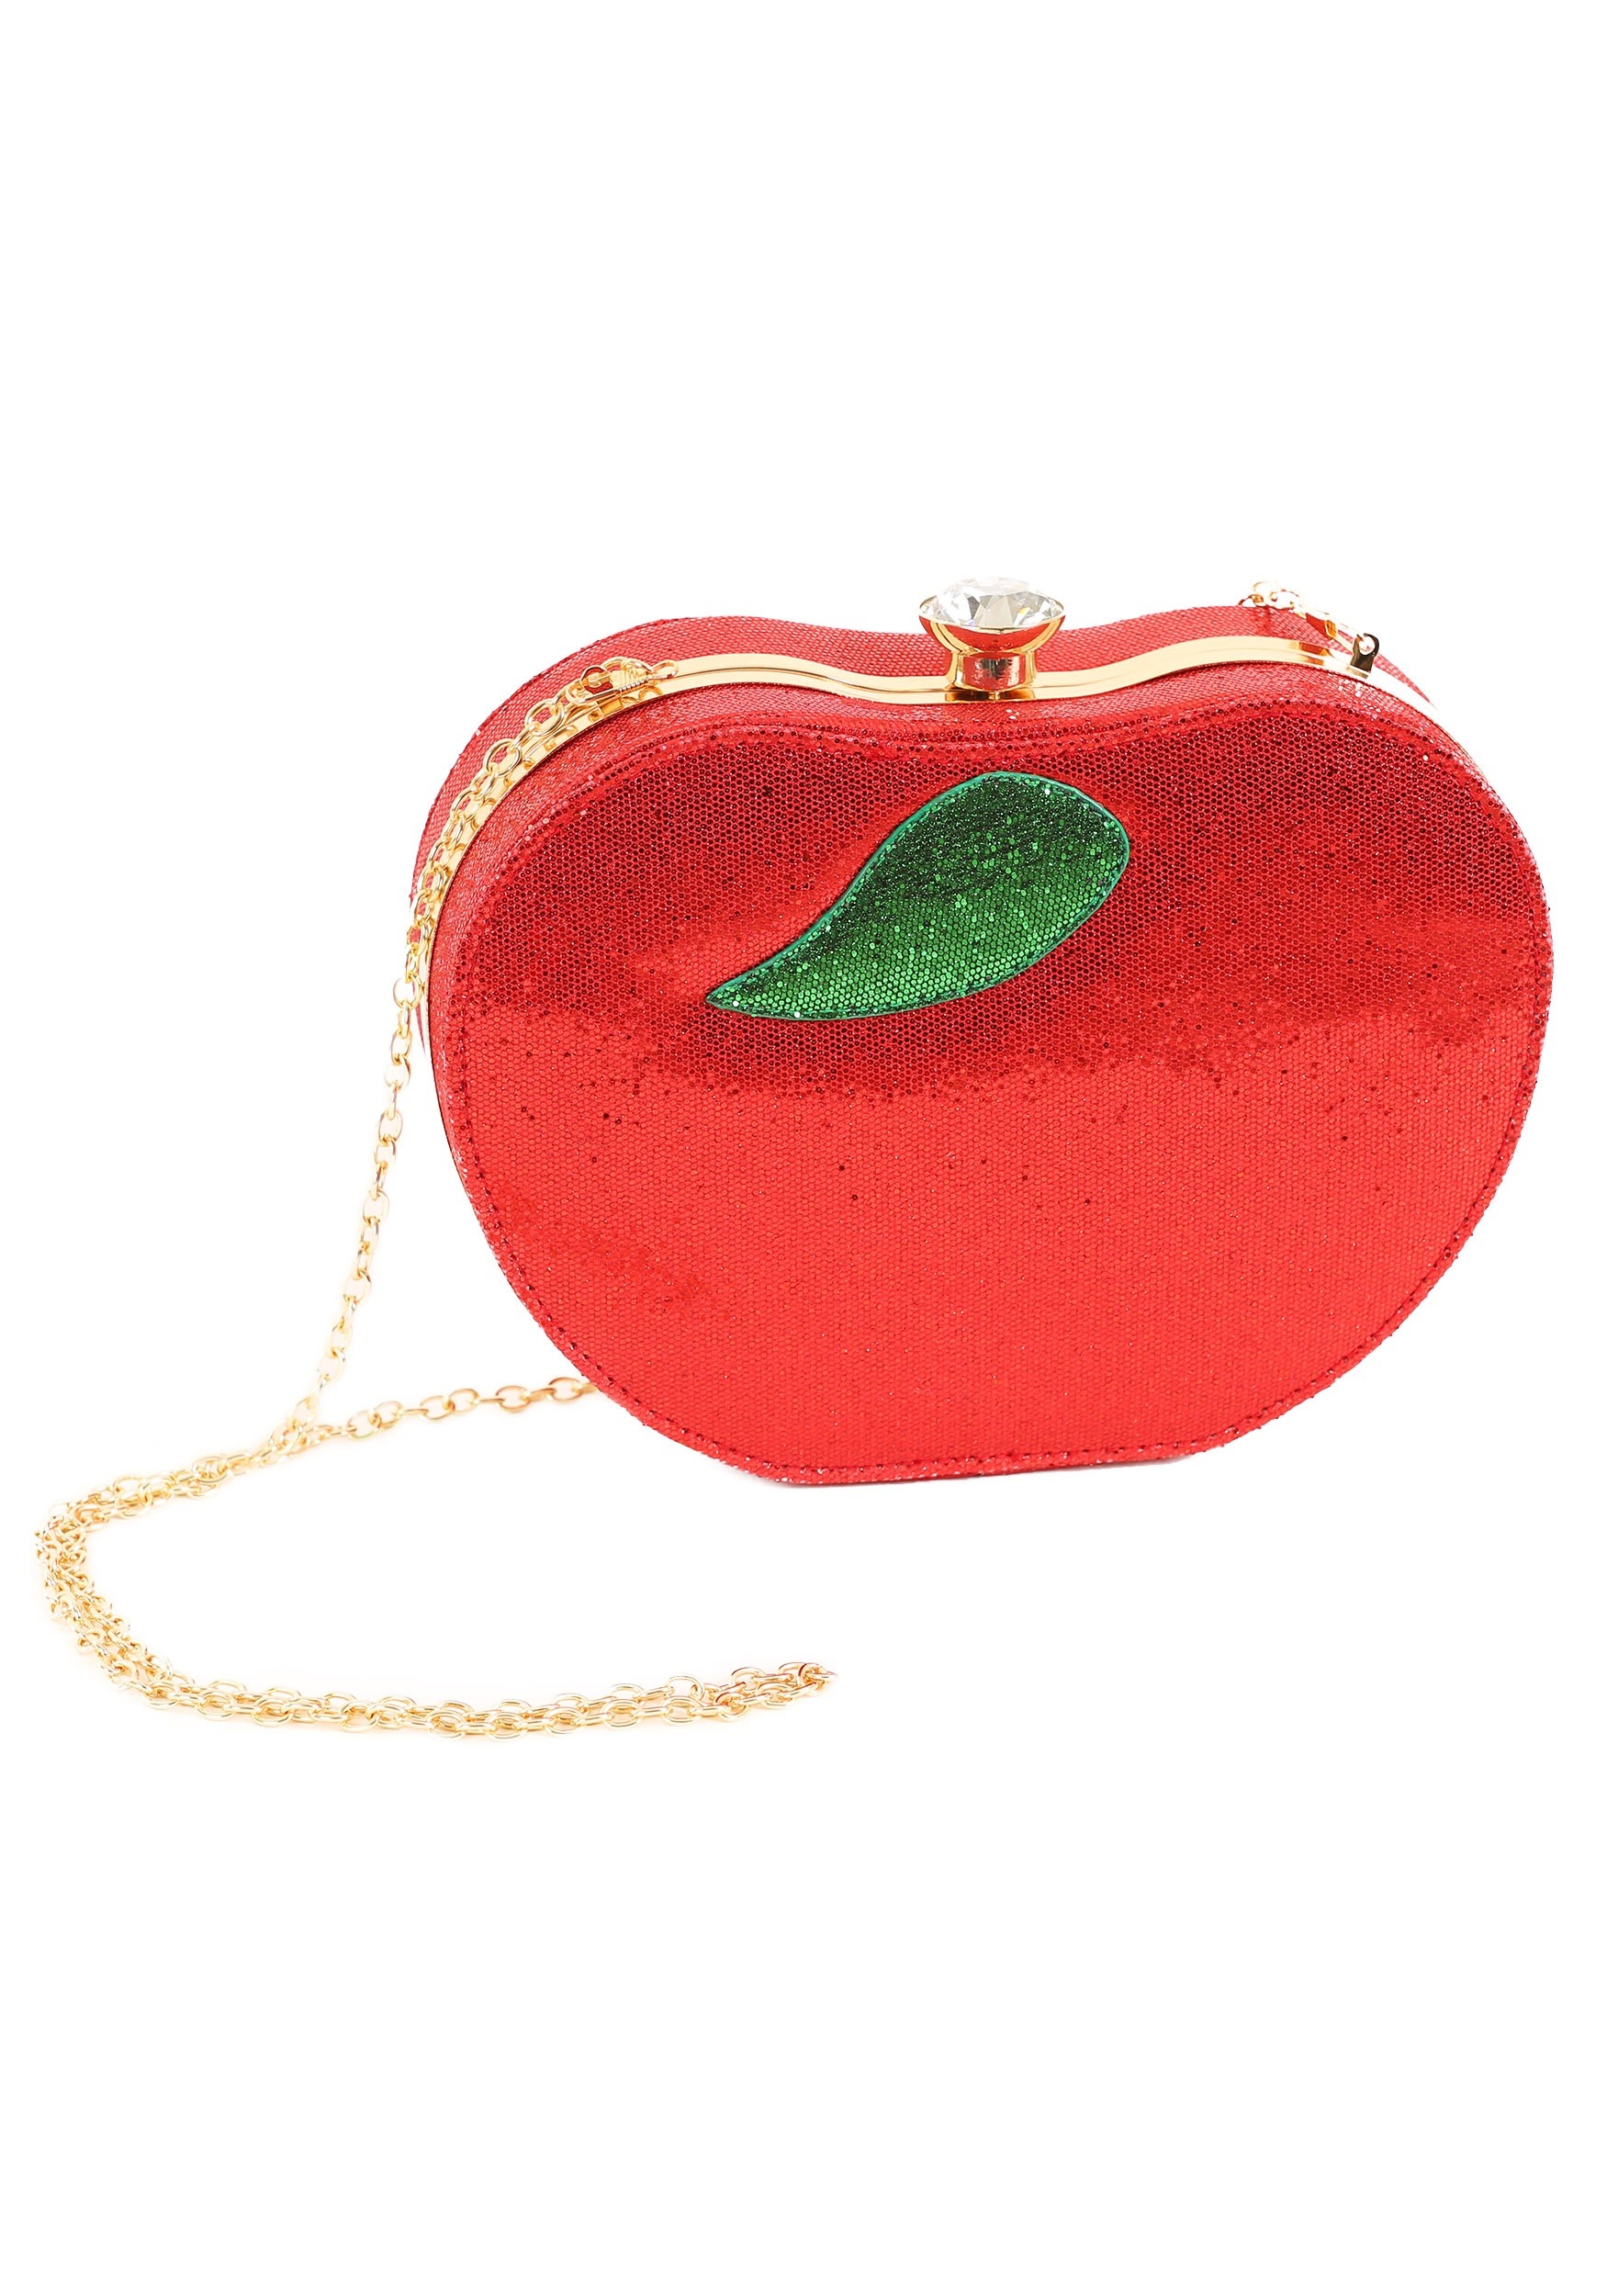 Apple Purse - In Stock : About Costume Shop